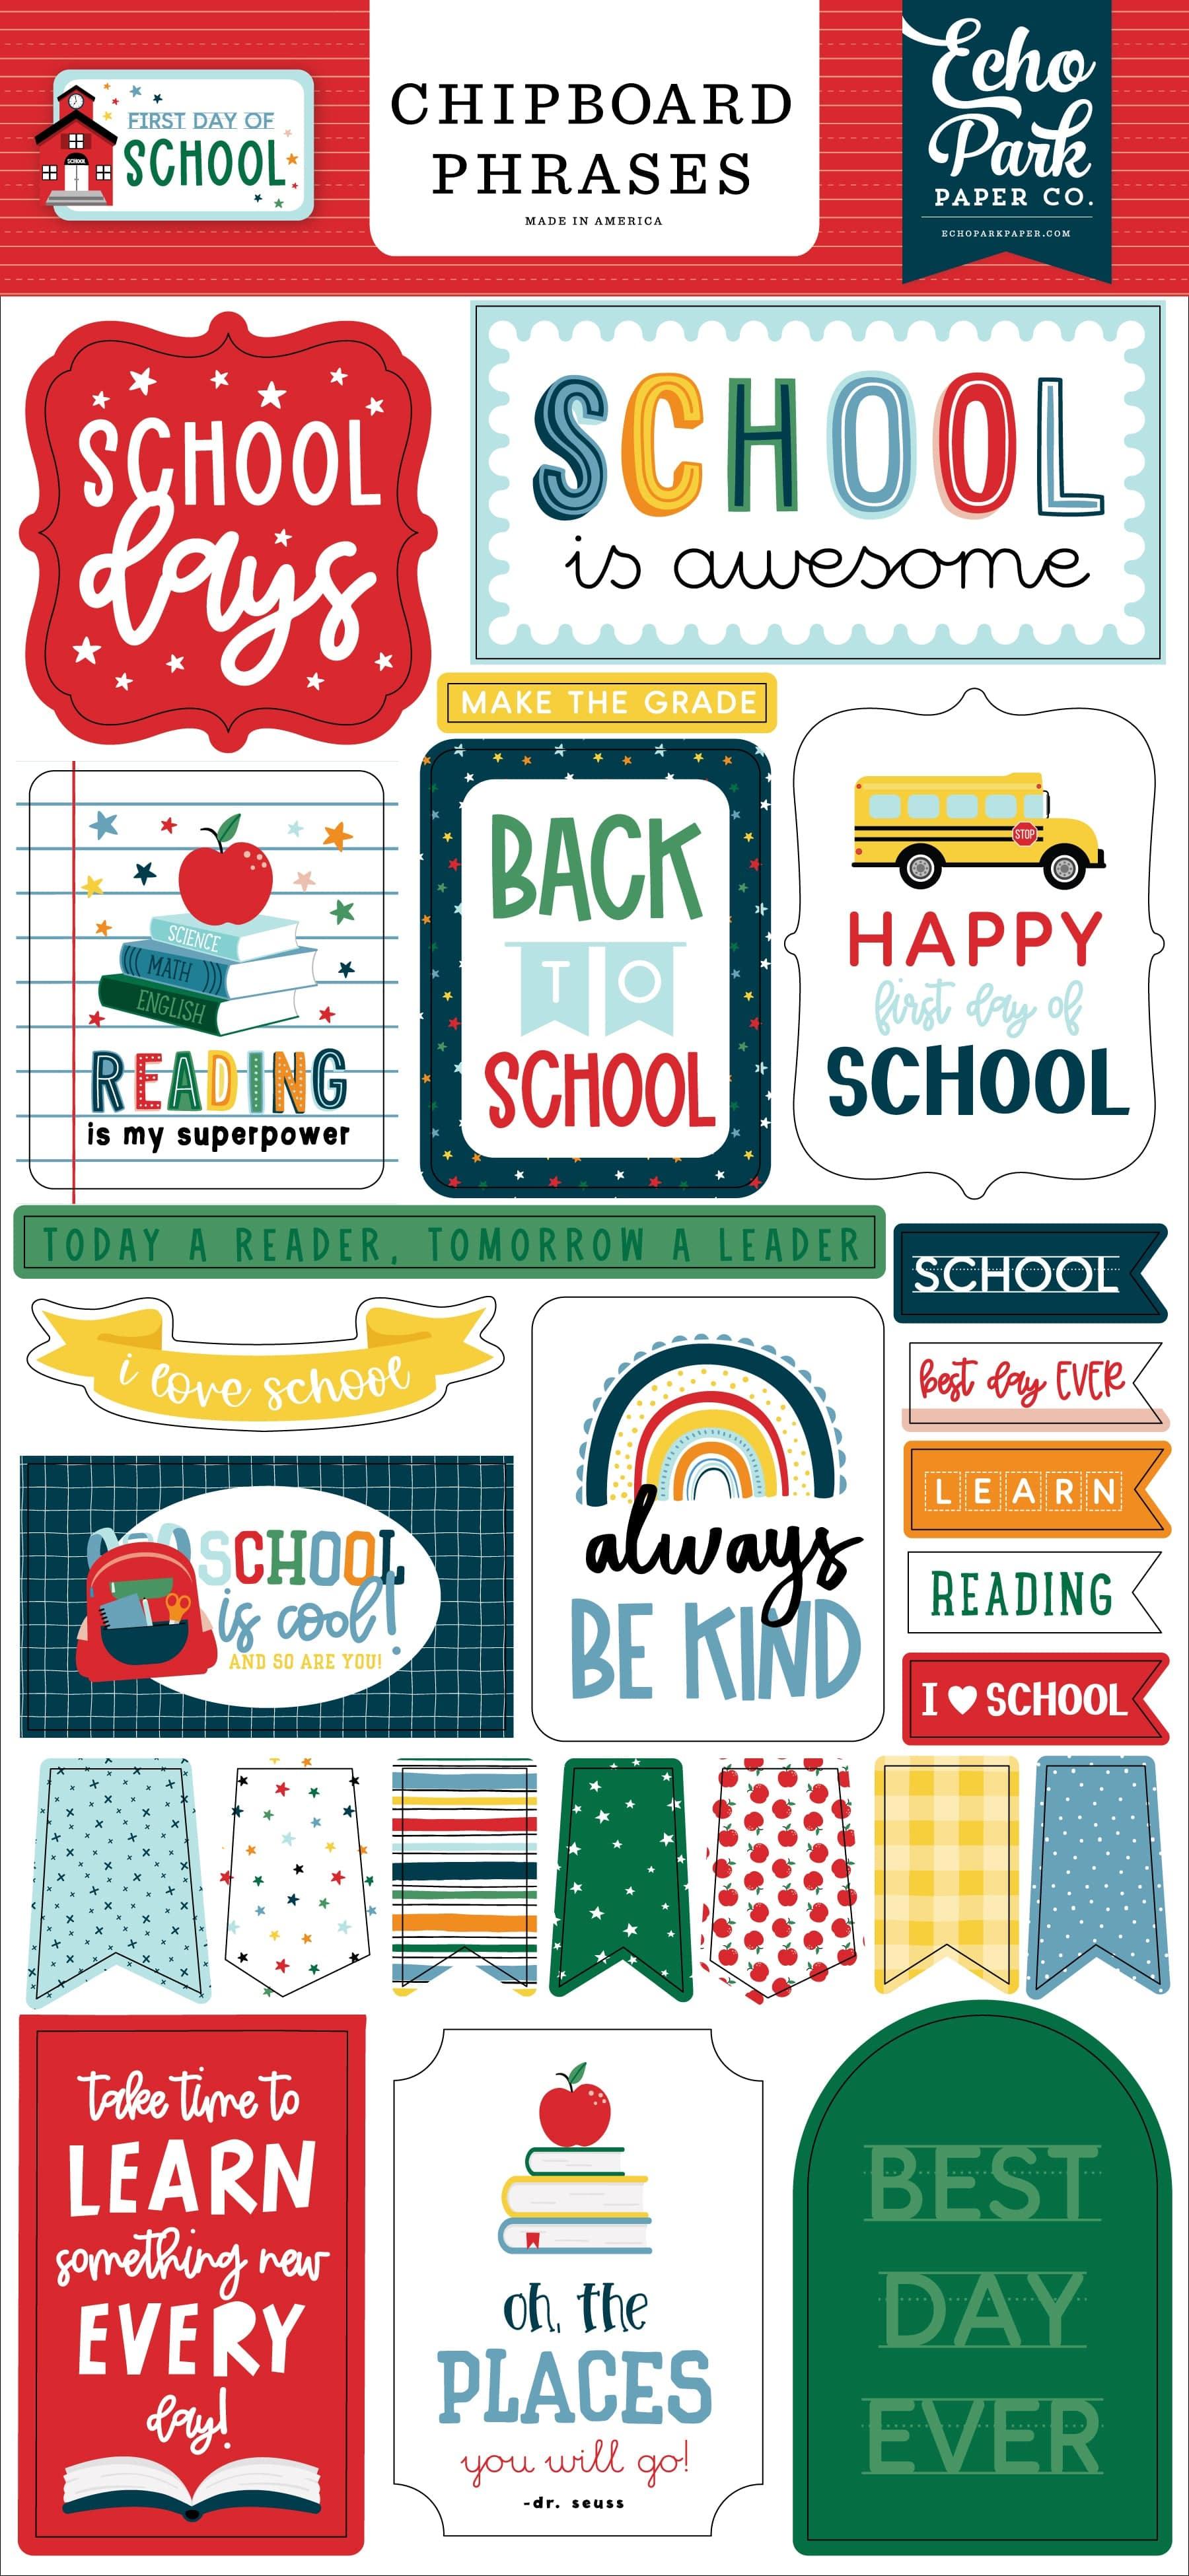 First Day Of School Collection 6 x 12 Scrapbook Chipboard Phrases by Echo Park Paper - Scrapbook Supply Companies